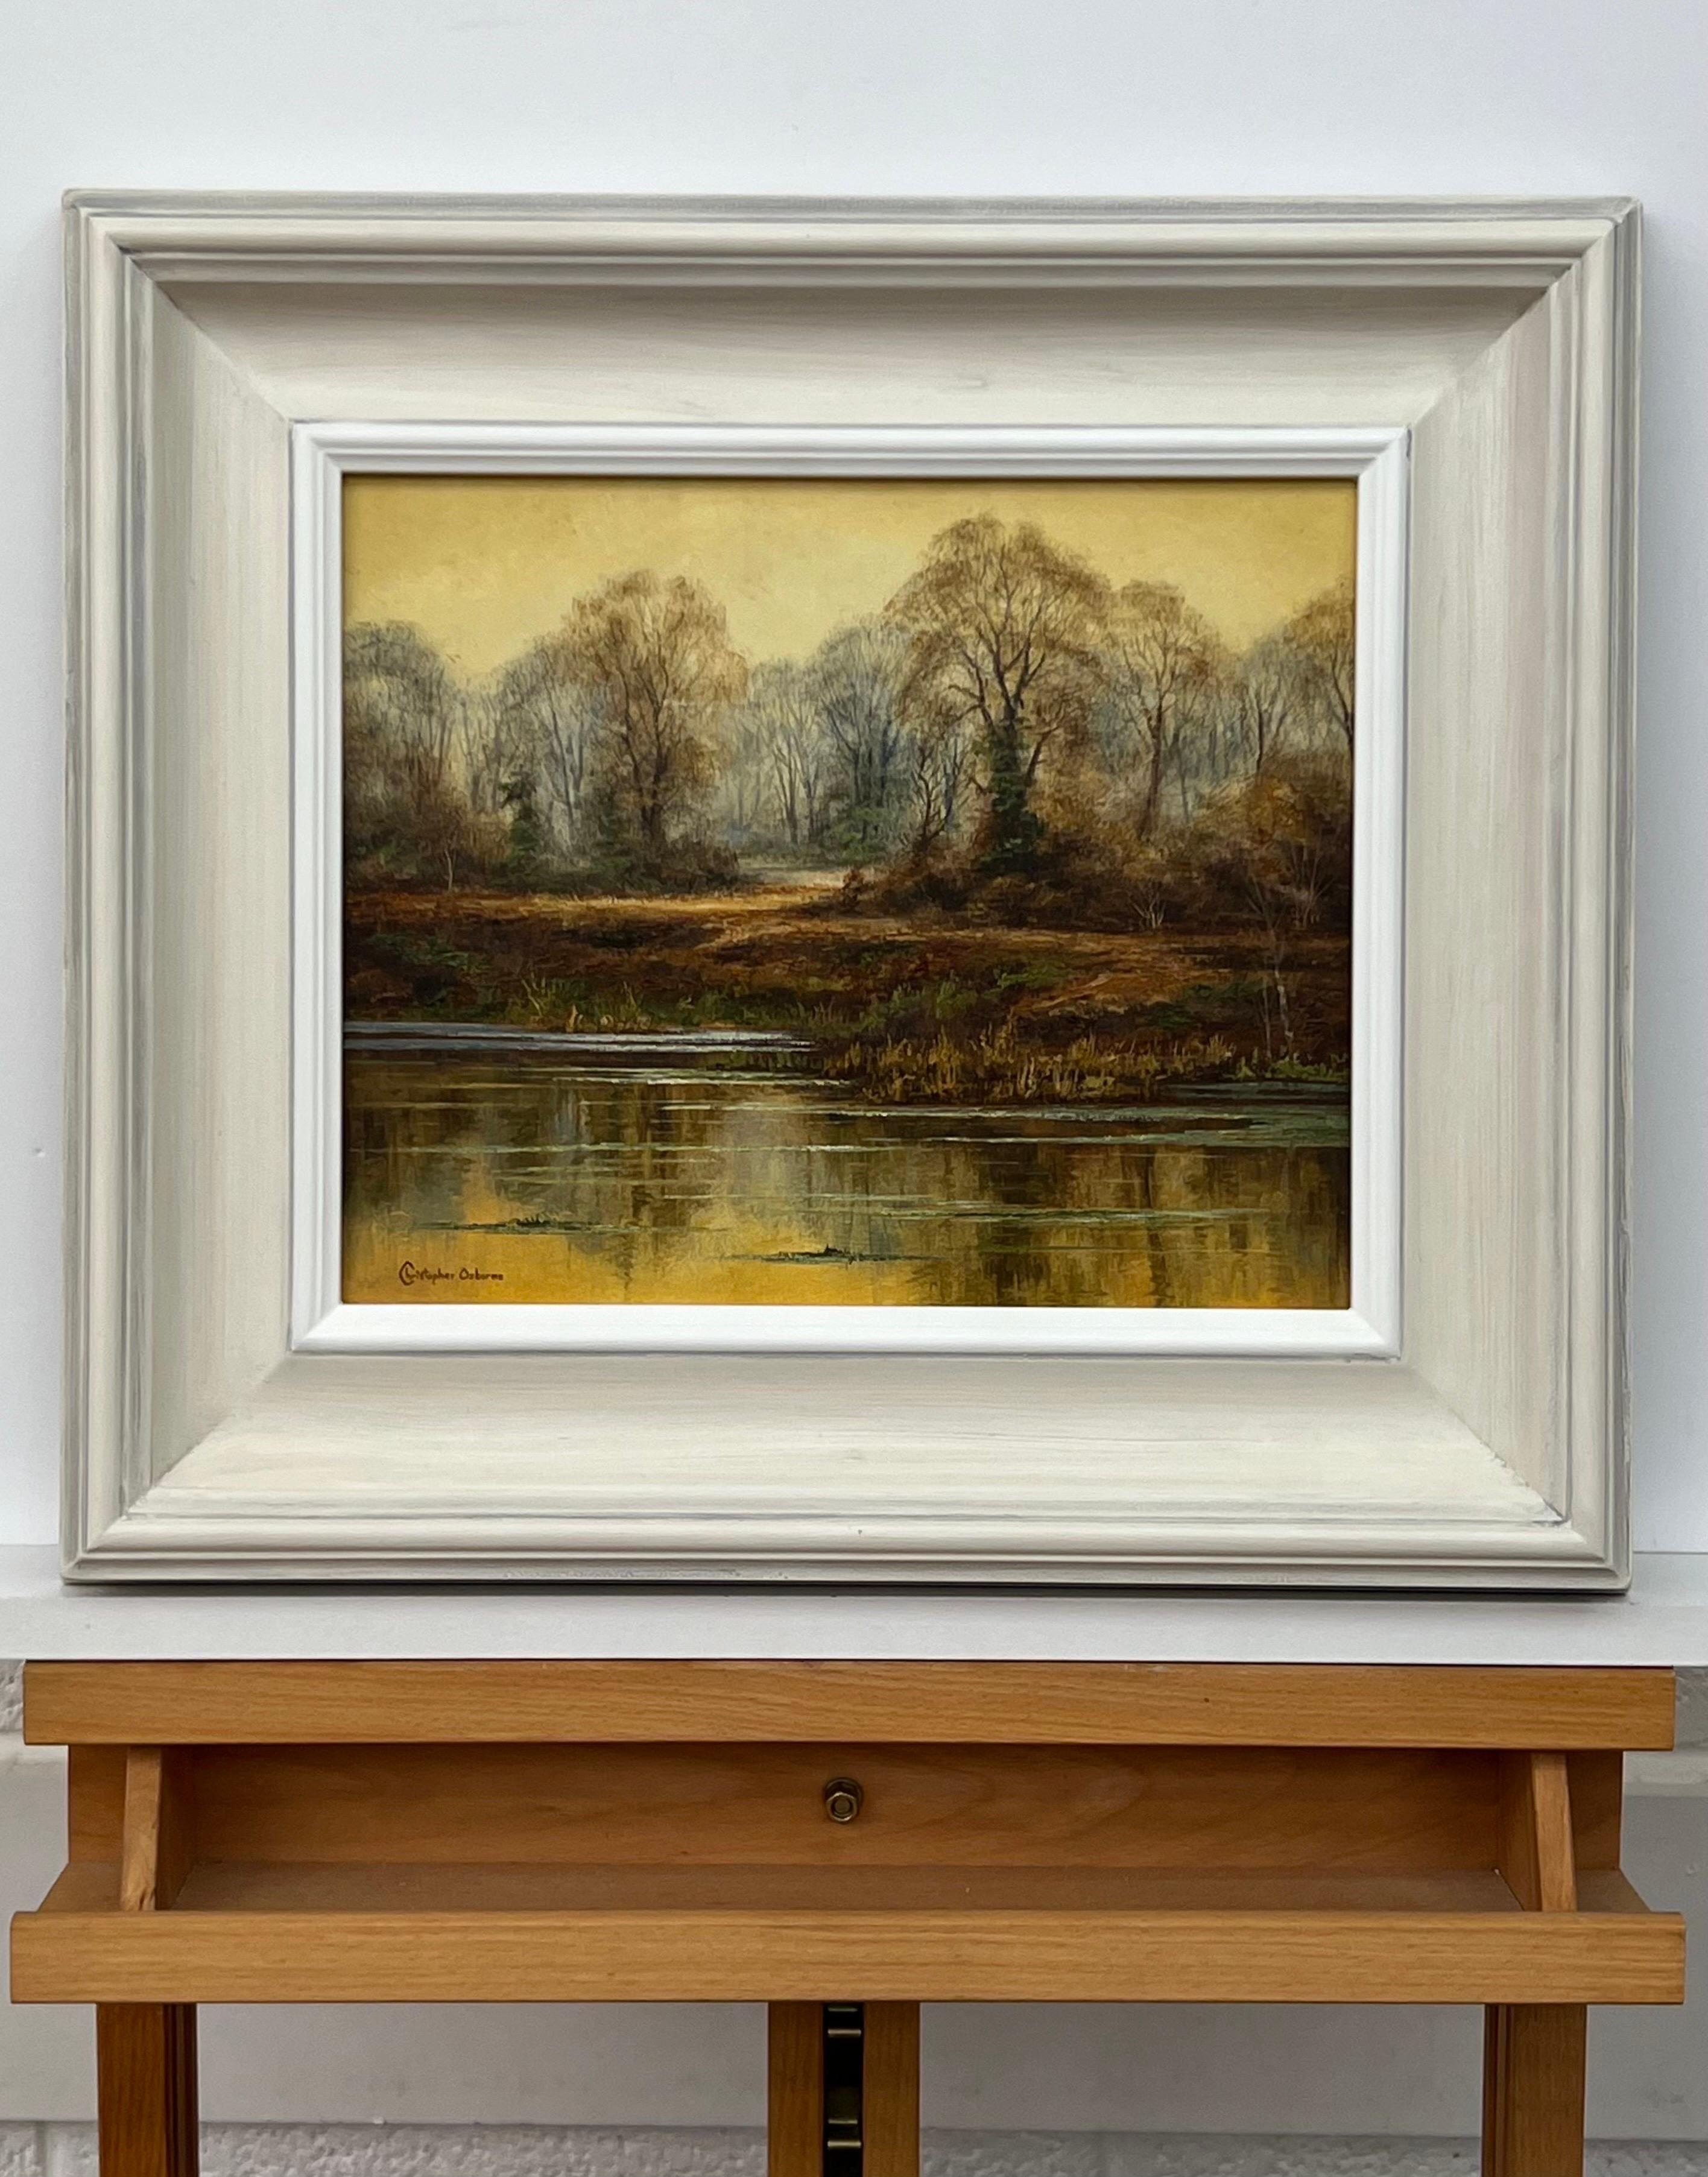 Reflections on Forest Pond in the English Countryside with Warm Yellows & Browns - Painting by Christopher Osborne